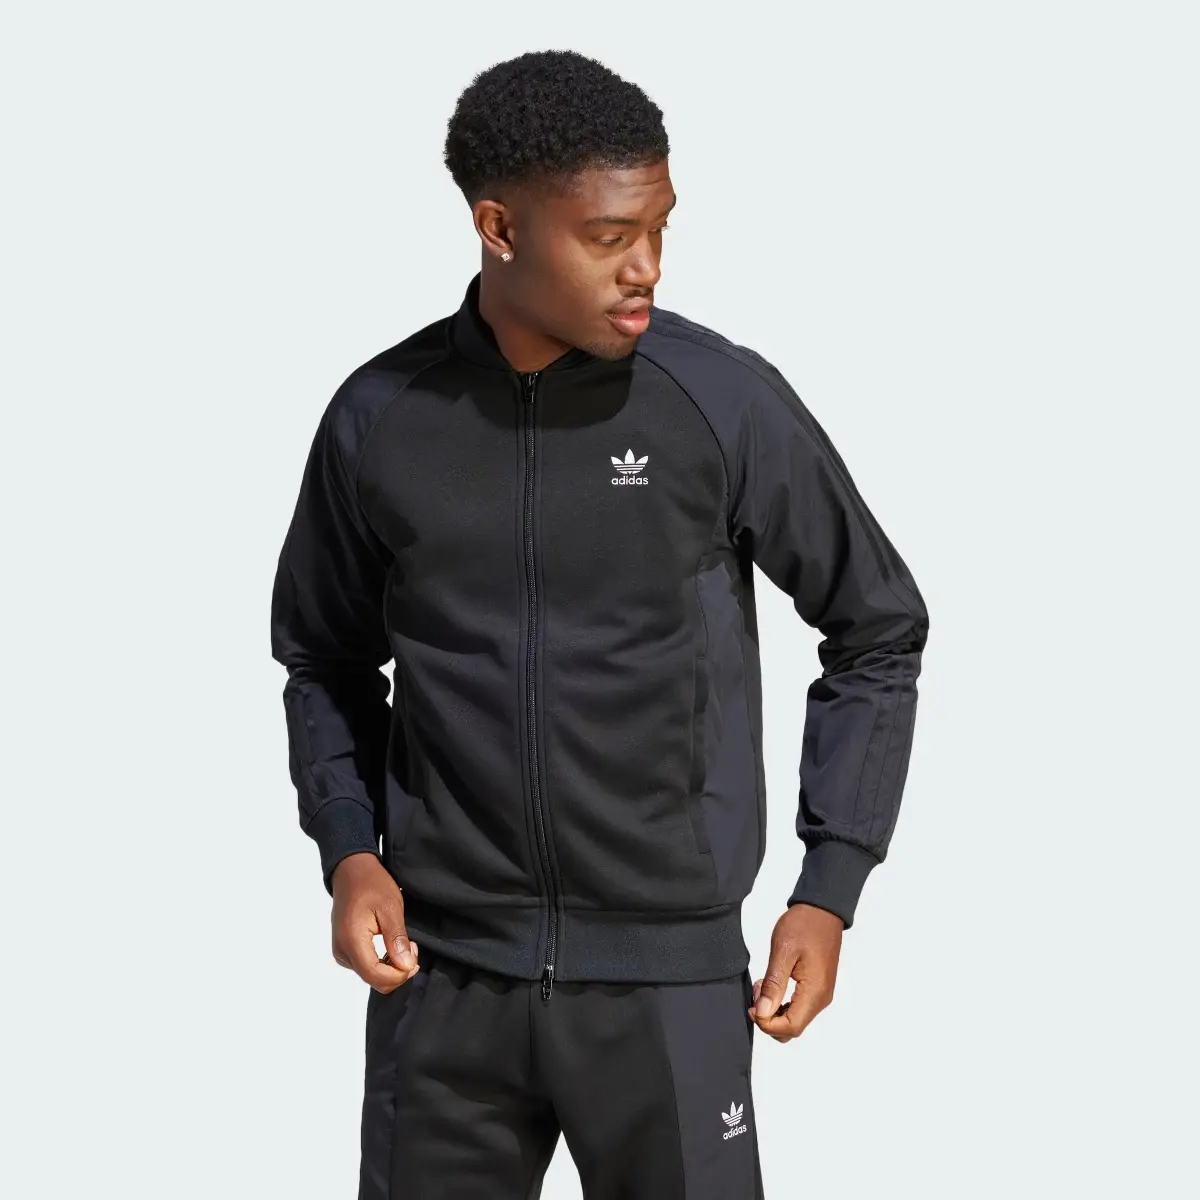 Adidas Adicolor Re-Pro SST Material Mix Track Jacket. 2